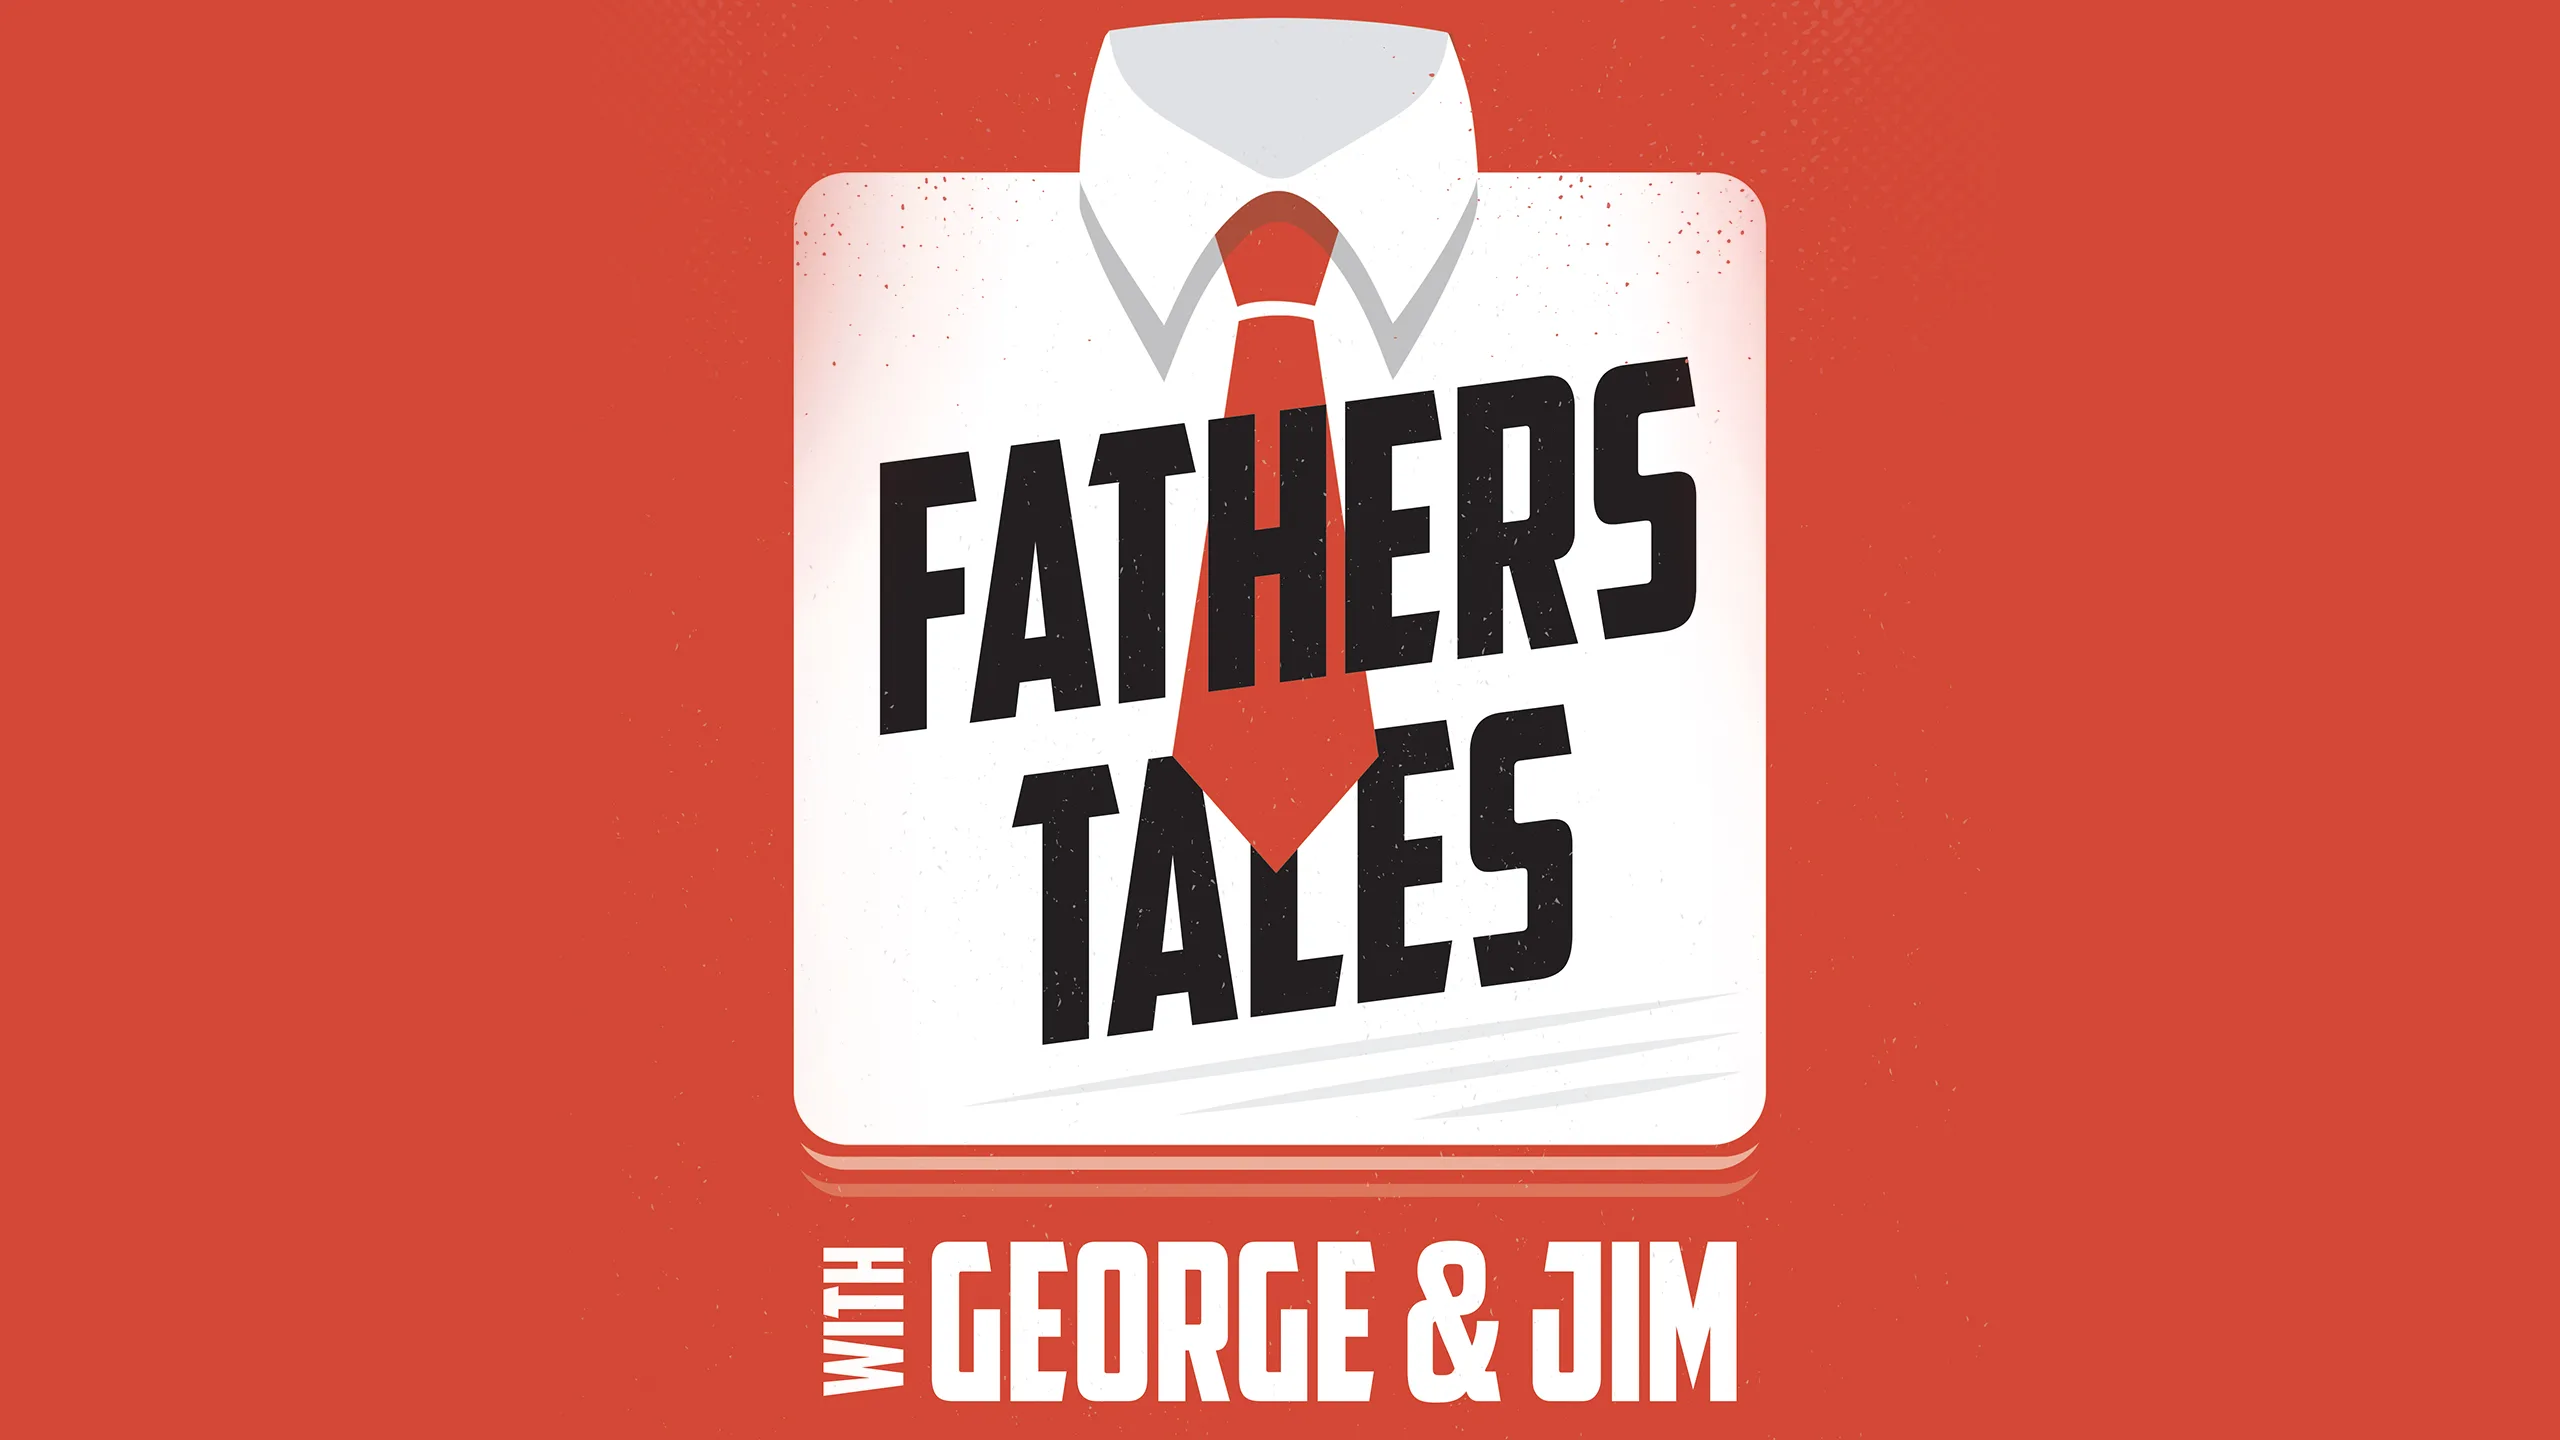 Fathers Tales Podcast